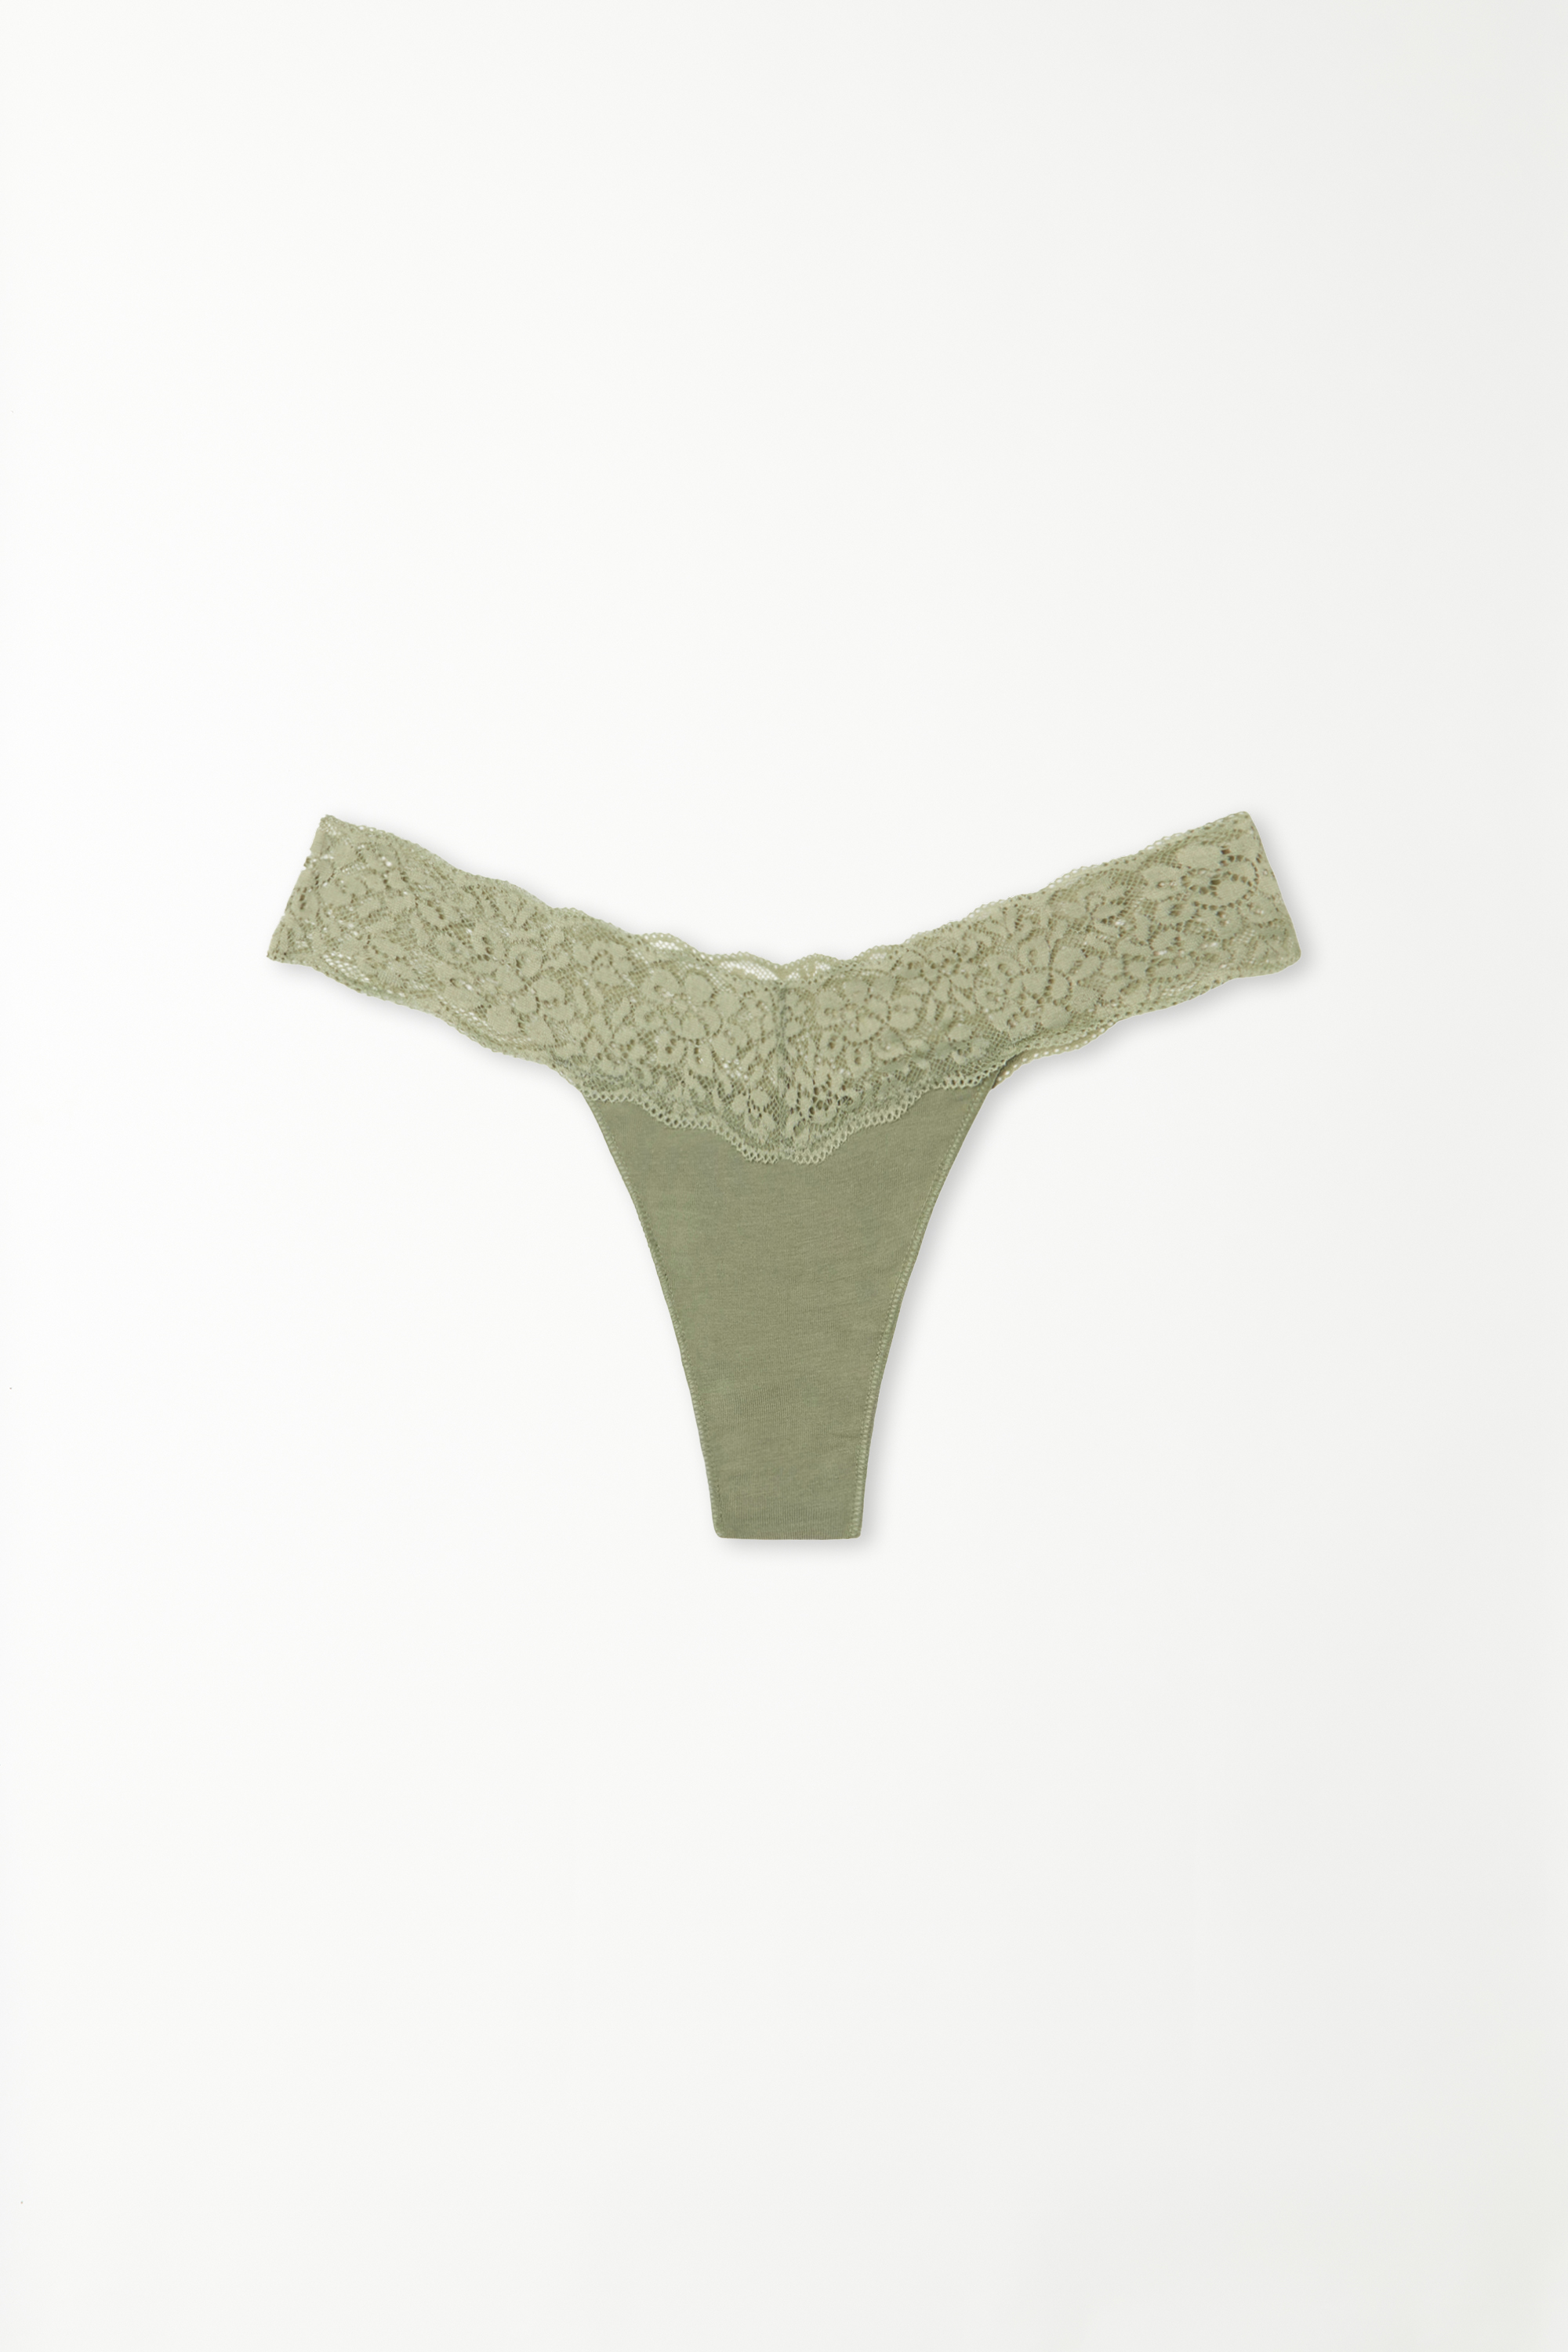 Cotton and Recycled Lace Brazilian Briefs